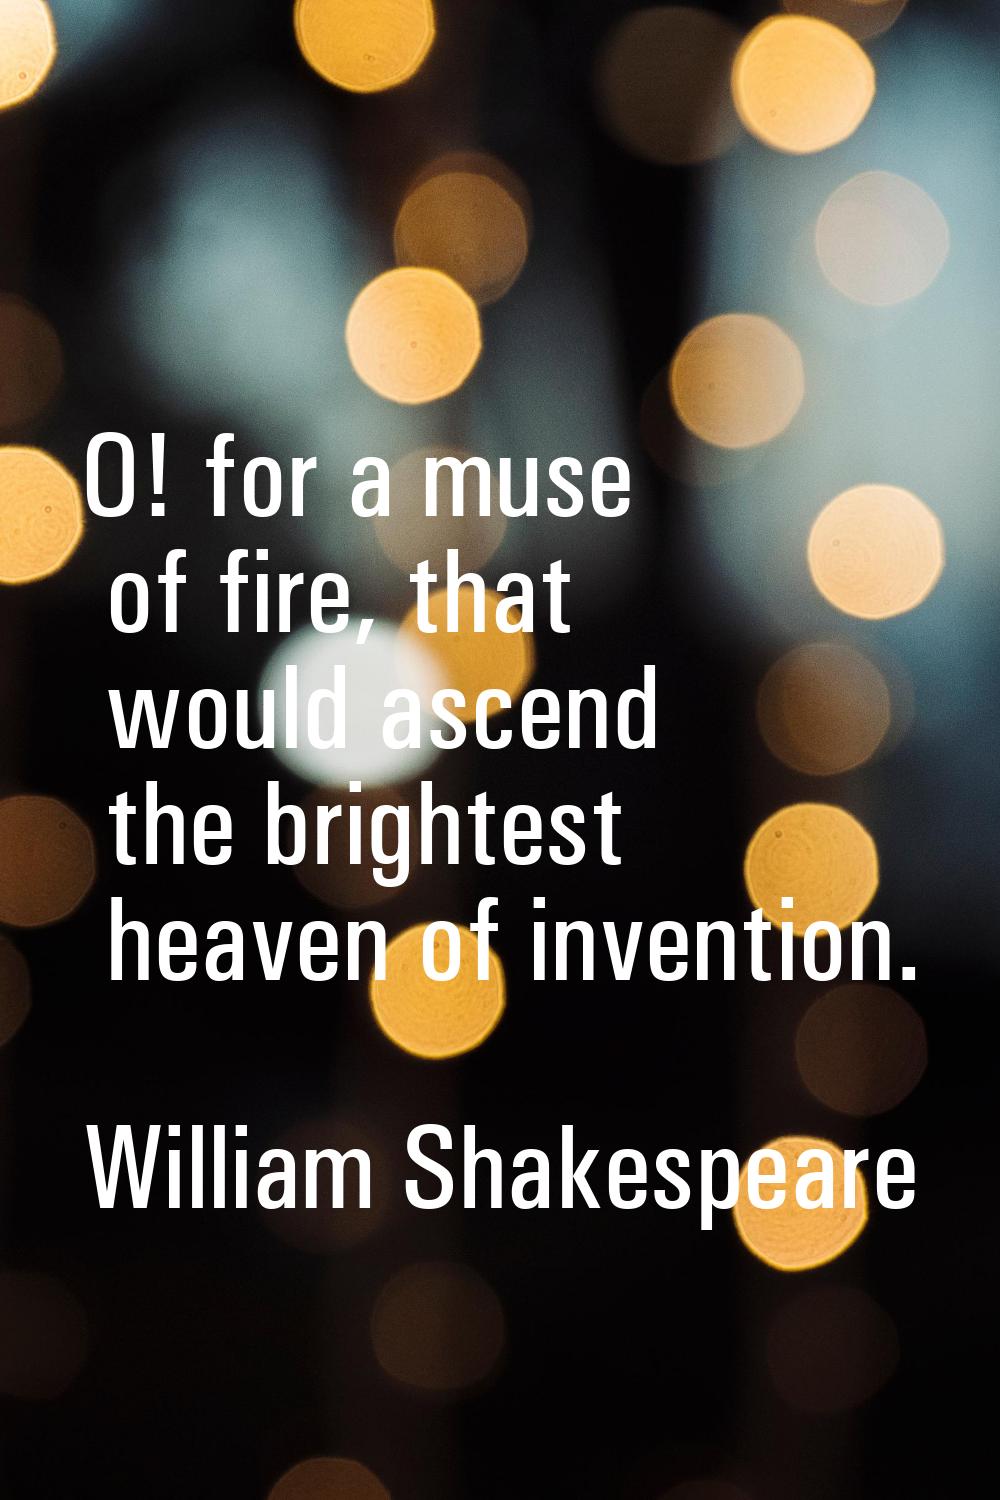 O! for a muse of fire, that would ascend the brightest heaven of invention.